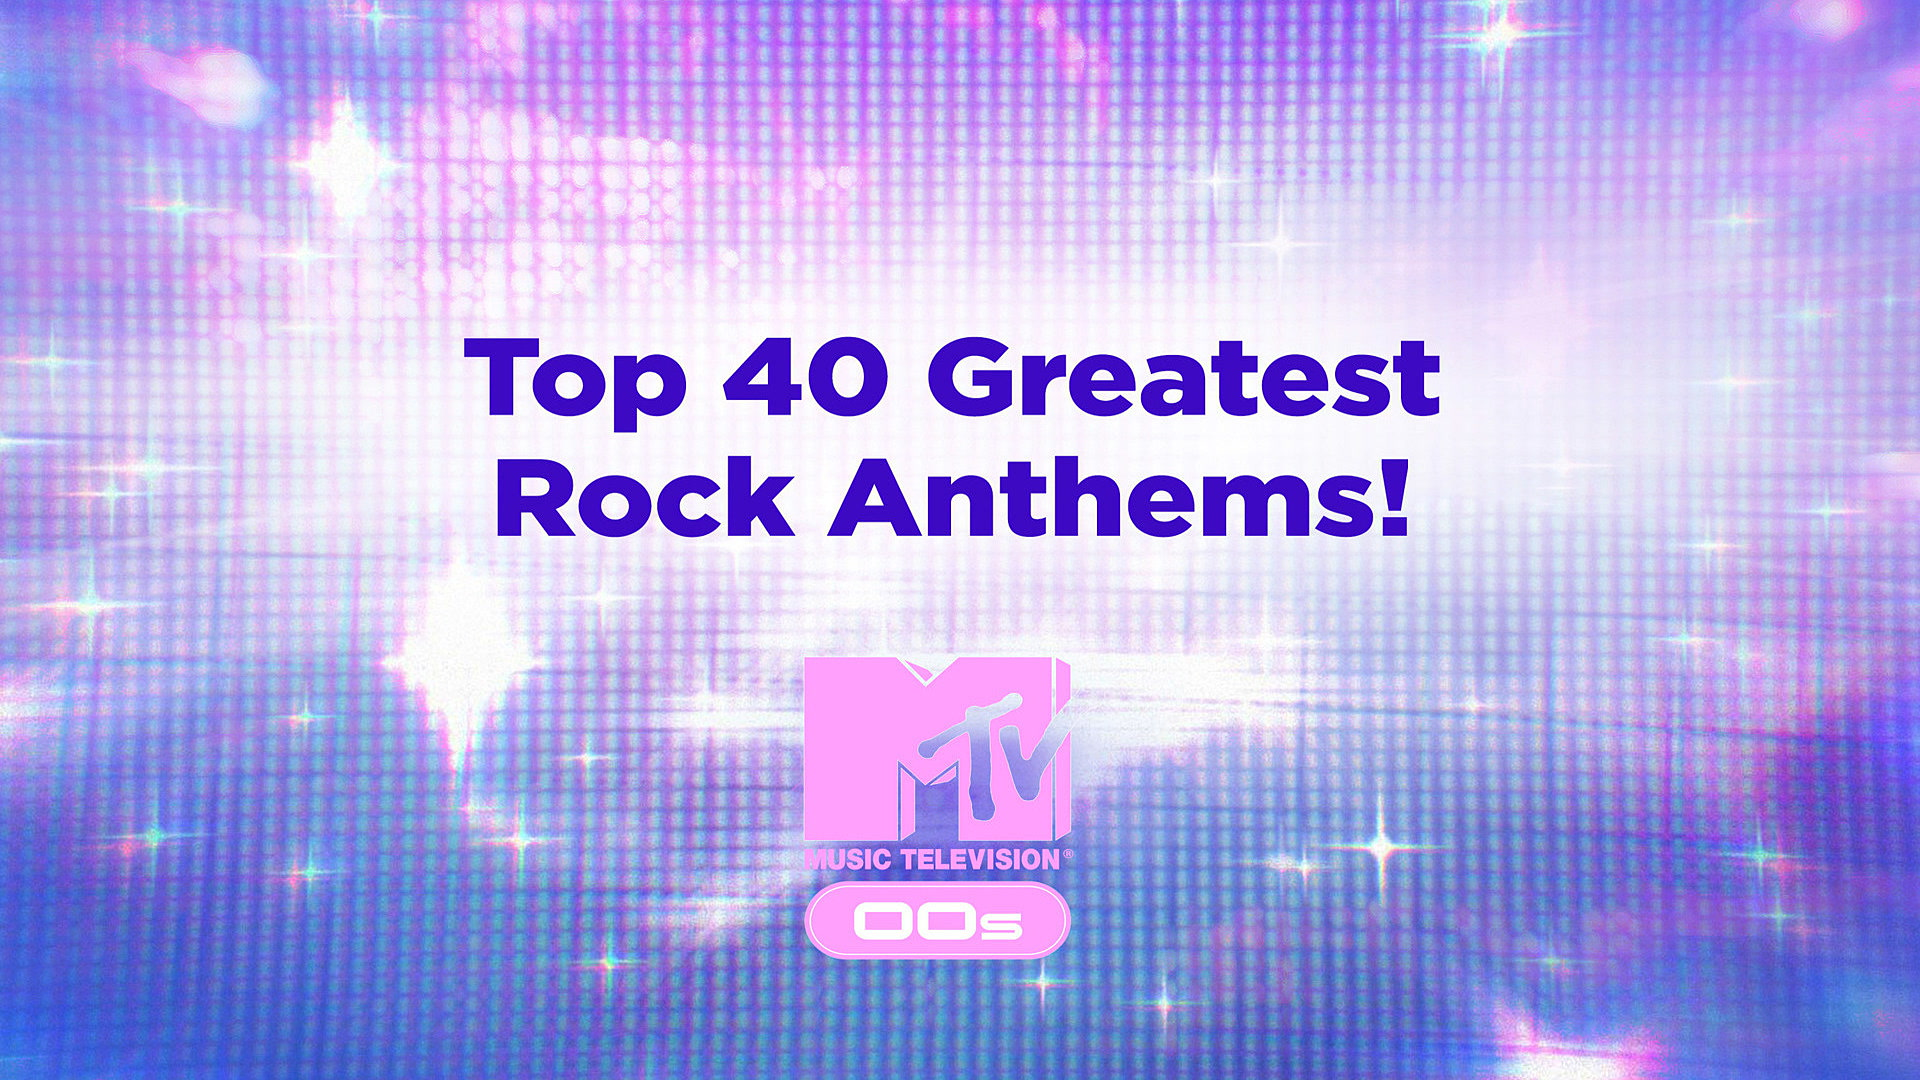 Top 40 Greatest Rock Anthems!